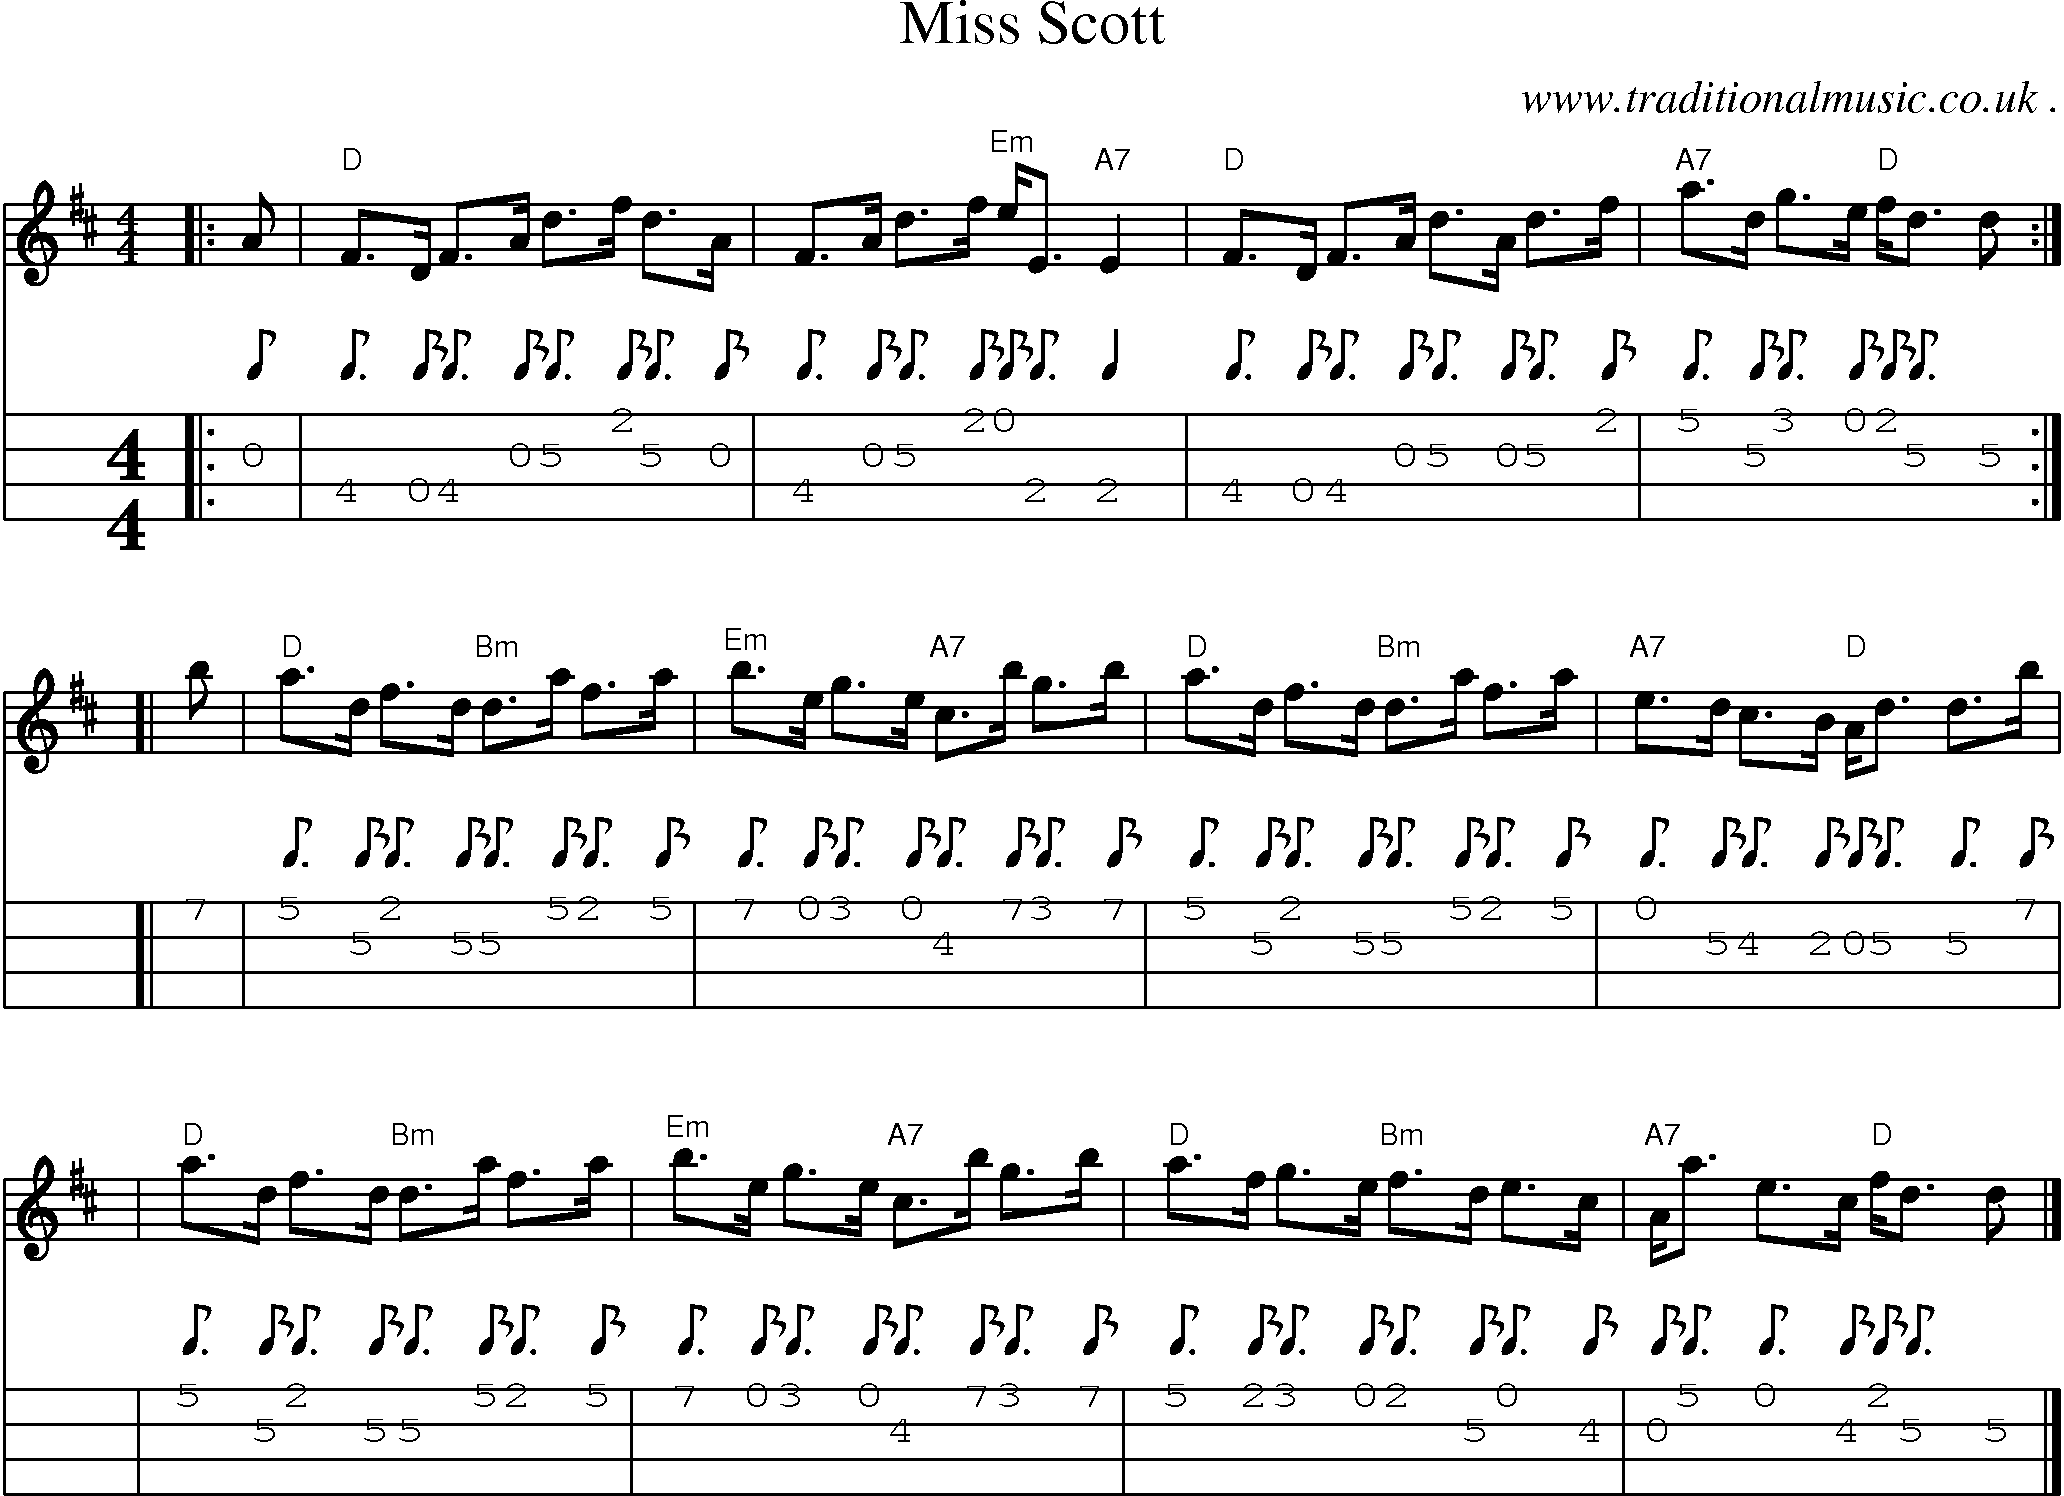 Sheet-music  score, Chords and Mandolin Tabs for Miss Scott